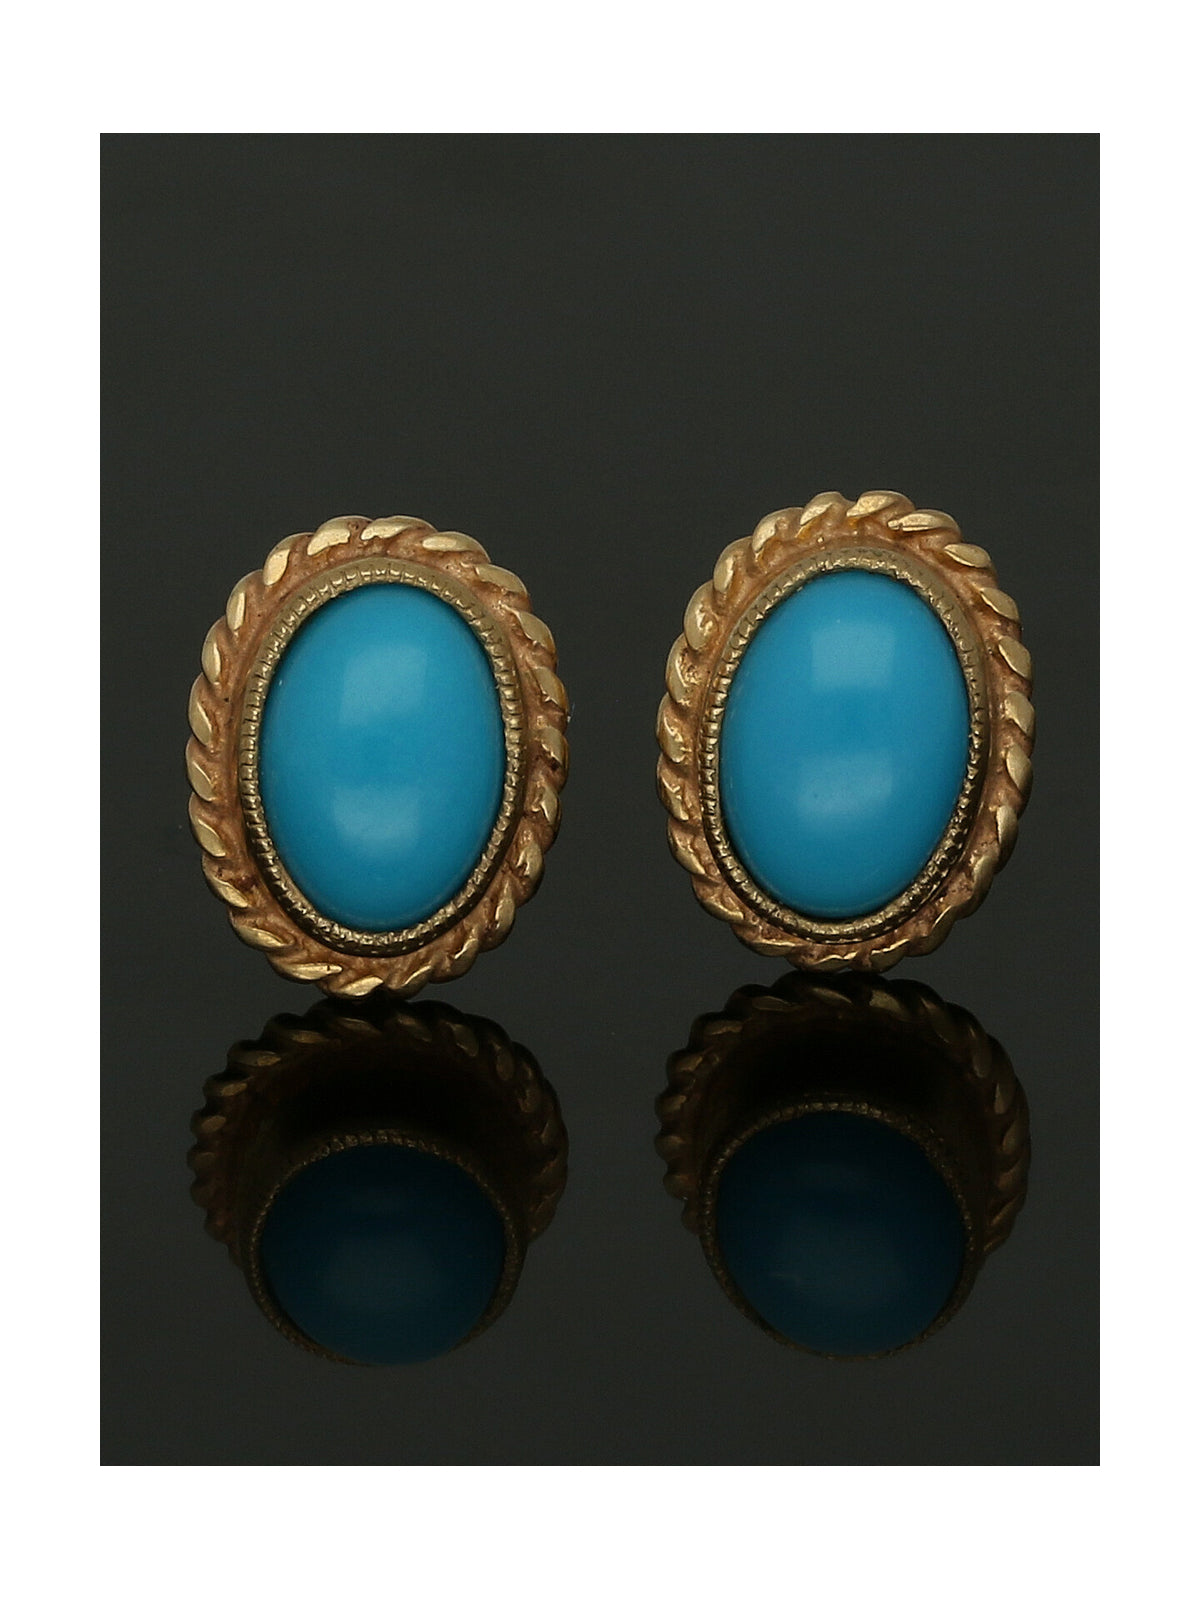 Turquoise Oval Rope Edge Stud Earrings in 9ct Yellow Gold